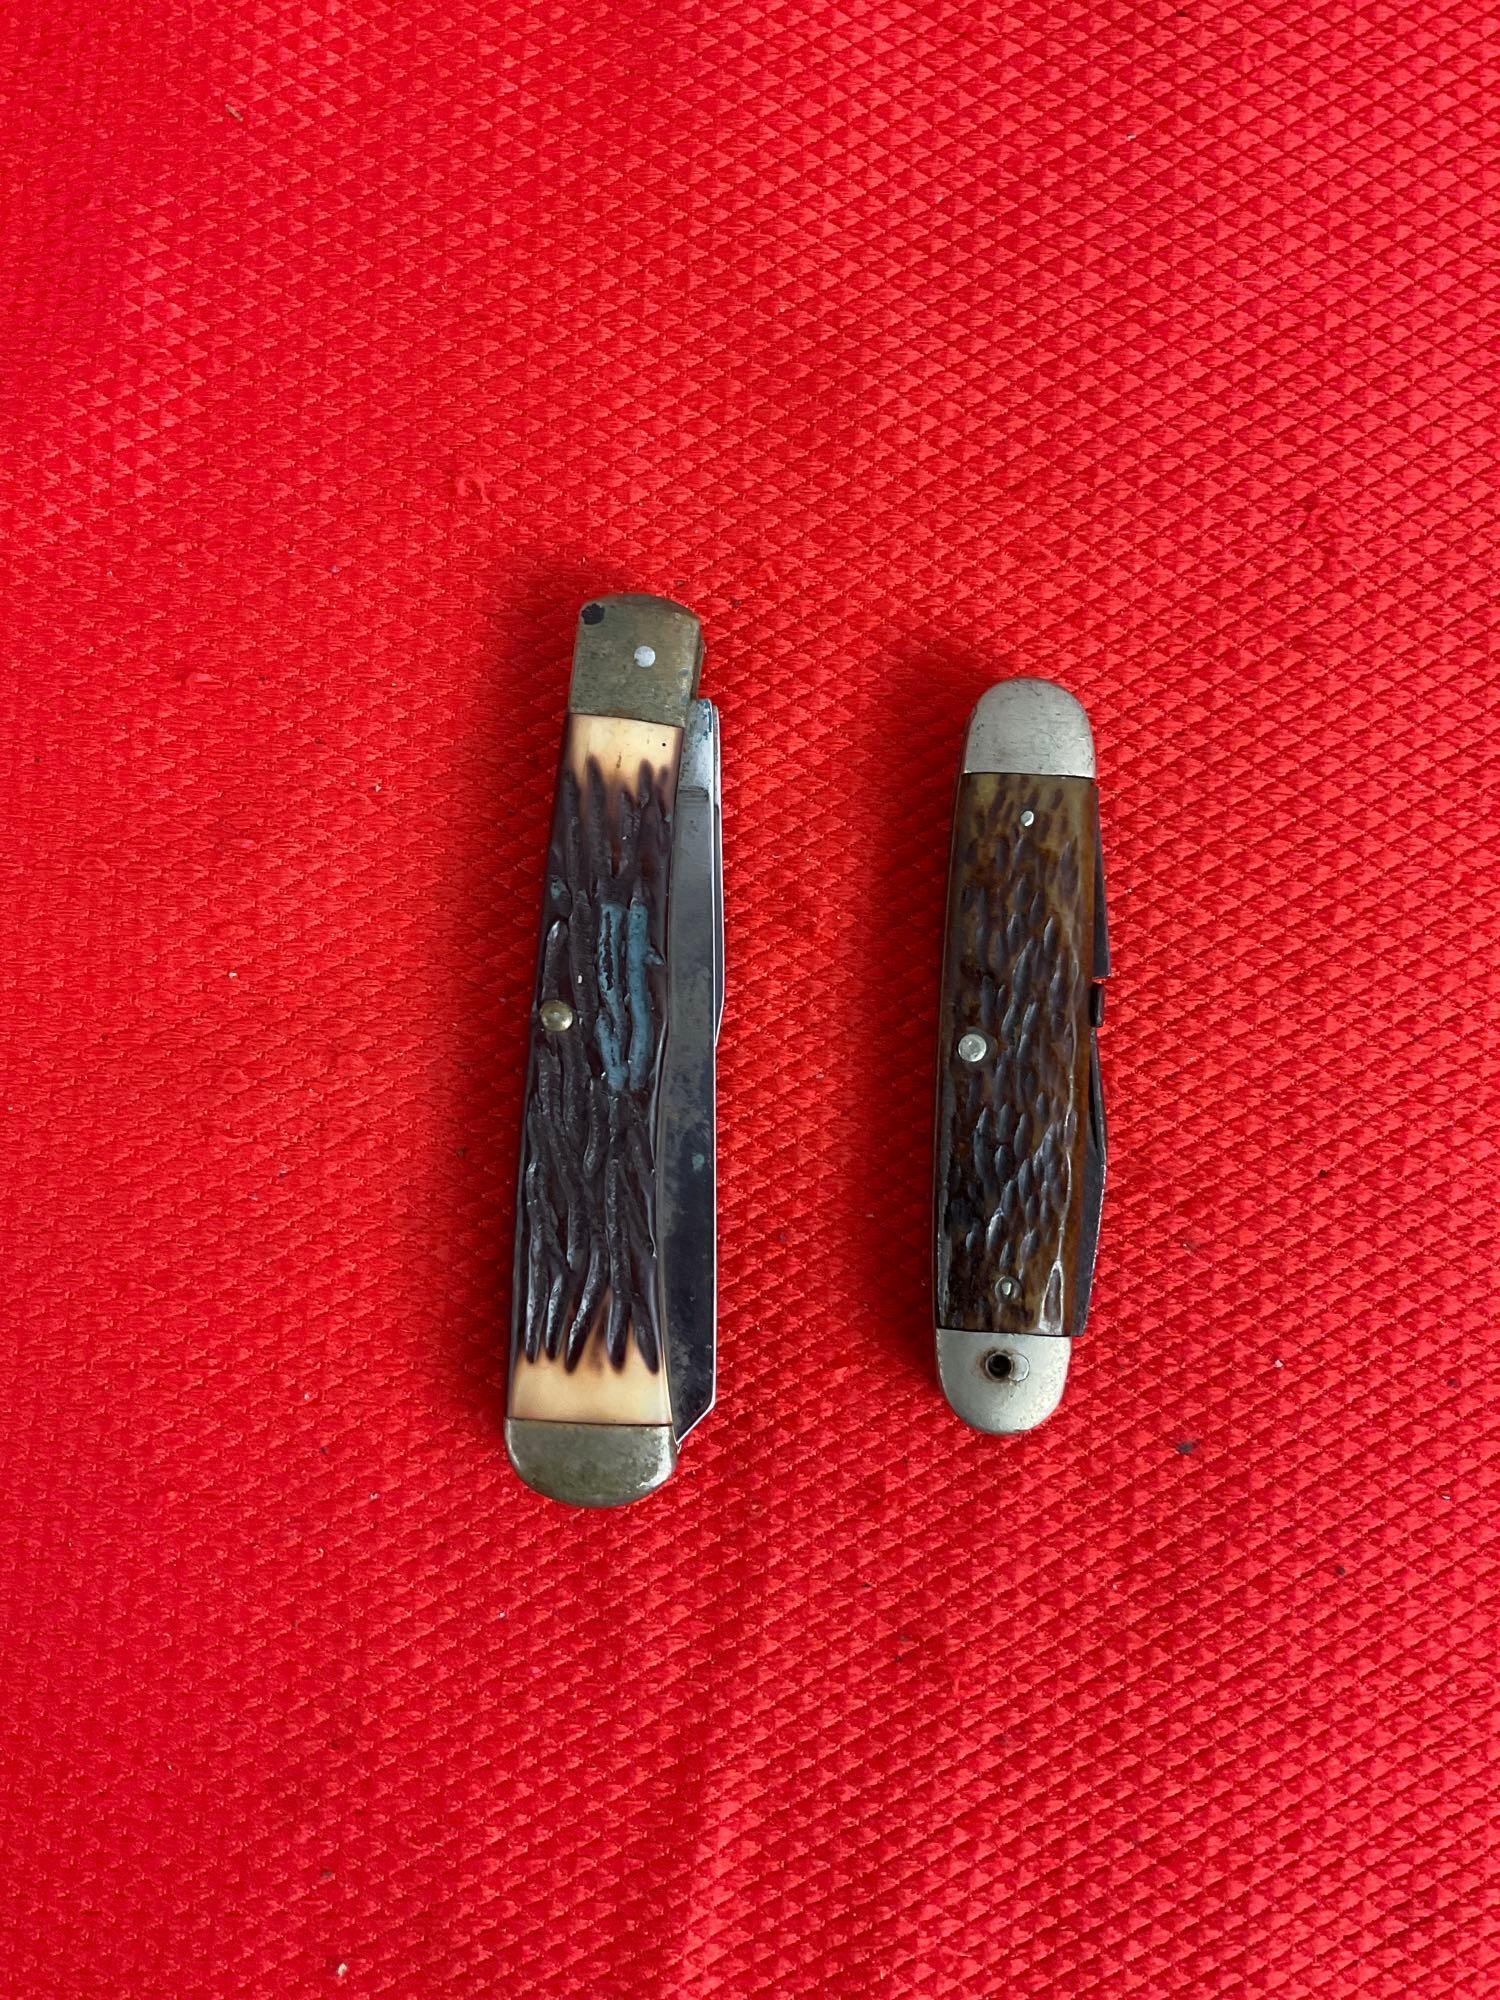 2 pcs Vintage Remington Steel Folding Knives Models R12 & Unnumbered Boy Scout Knife. As Is. See